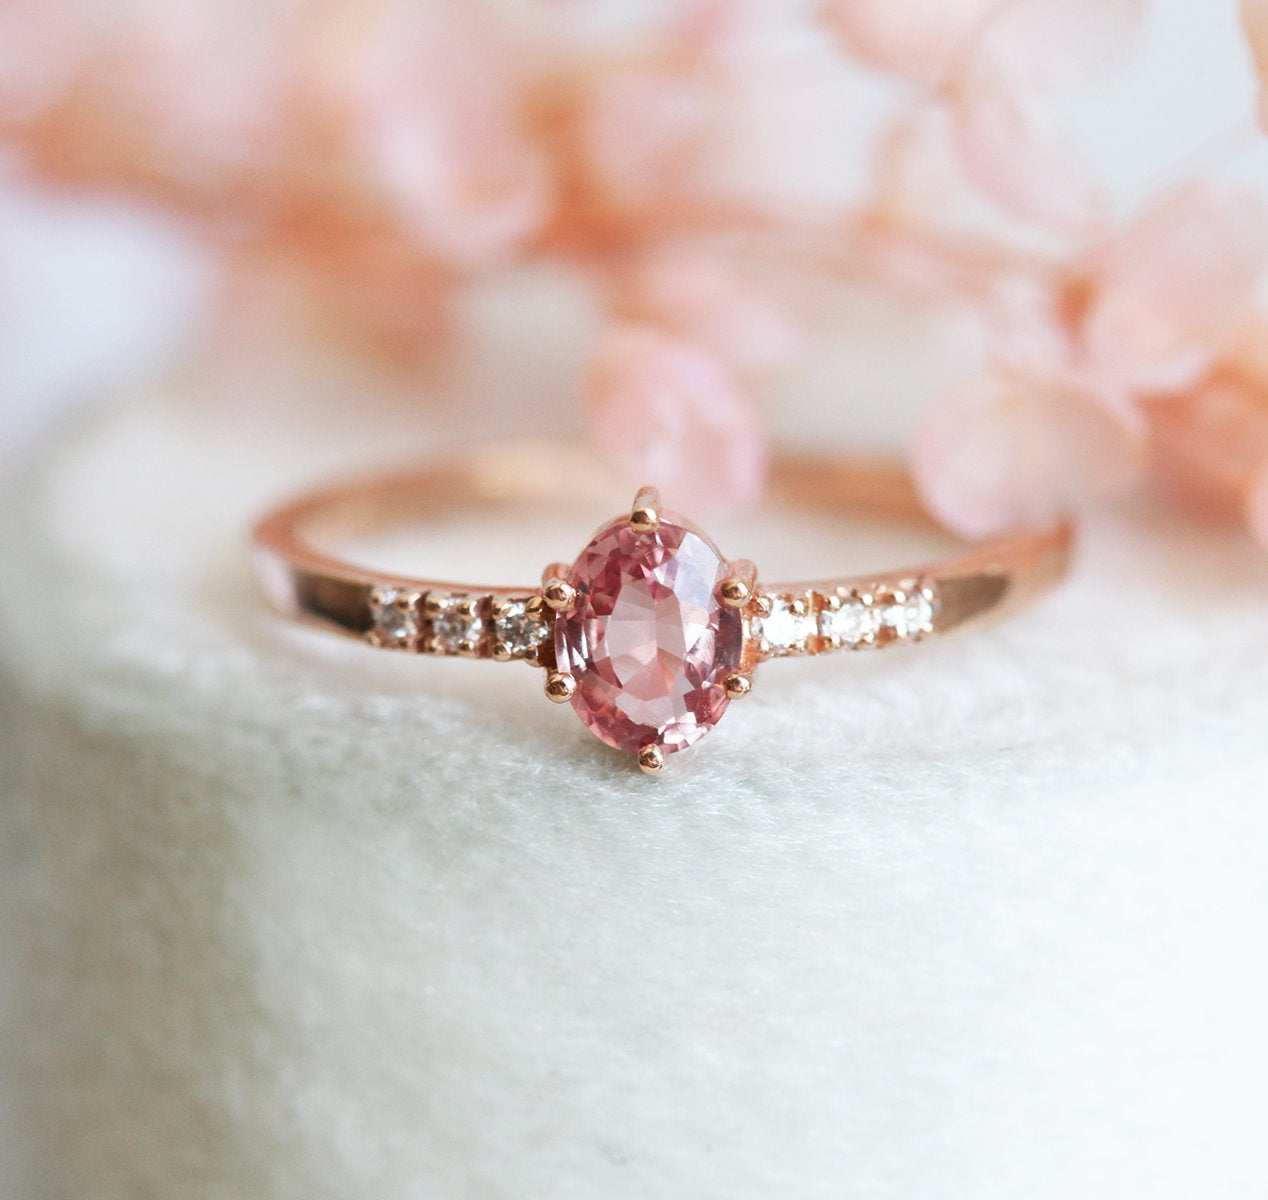 Oval peach padparadscha sapphire ring with white side diamonds